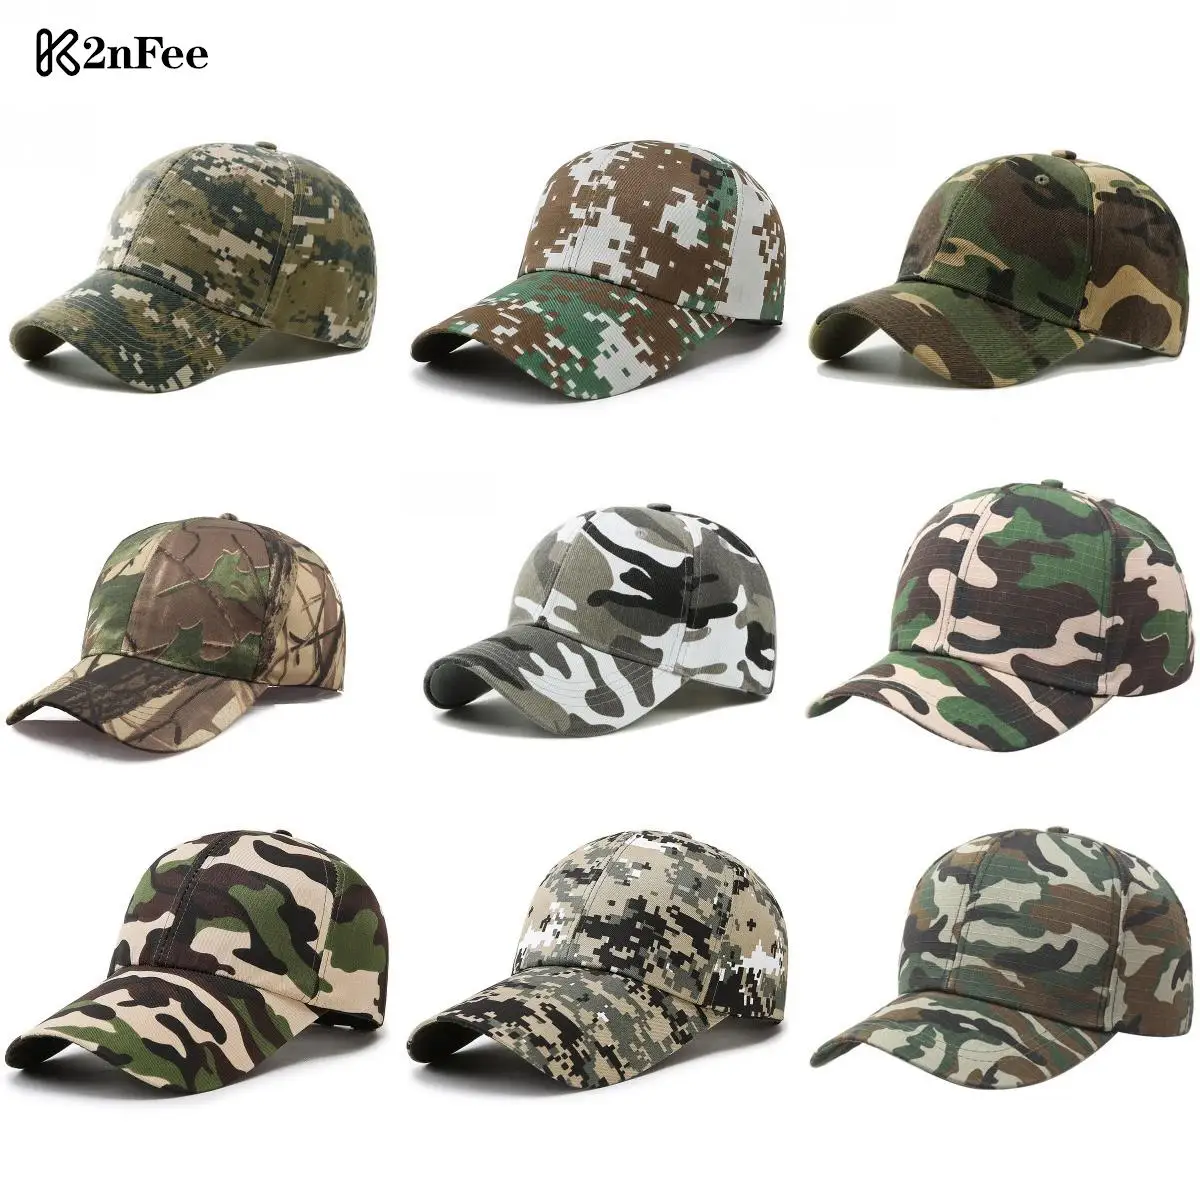 

Camouflage Military Army Camo Adjustable Baseball Cap Tactical Summer Sunscreen Hat Airsoft Hunting Camping Hiking Fishing Caps